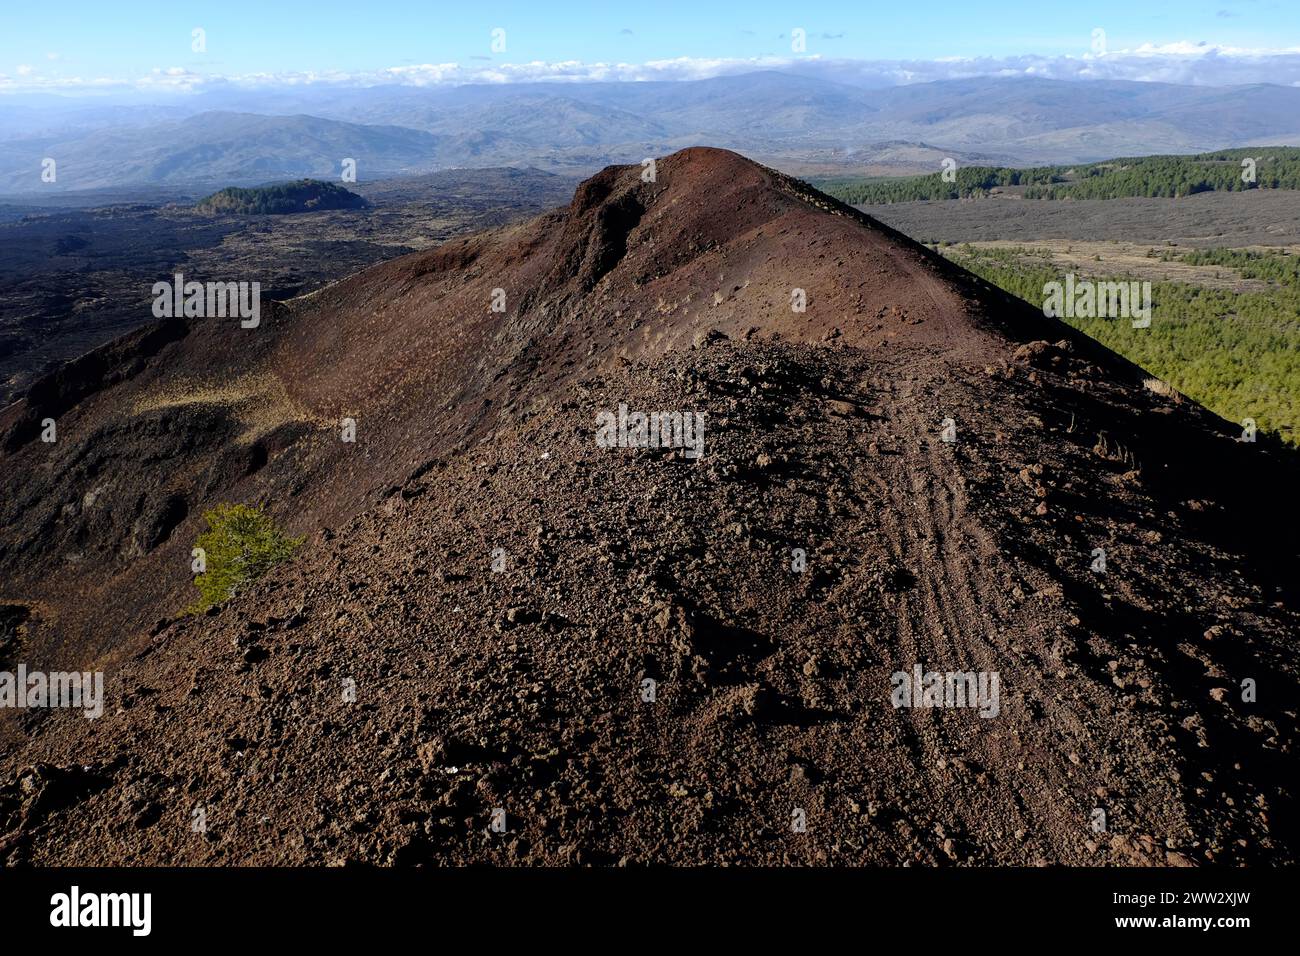 extinct volcano crater with lone pine tree in Etna Park and mountain range at the horizon, Sicily, Italy Stock Photo